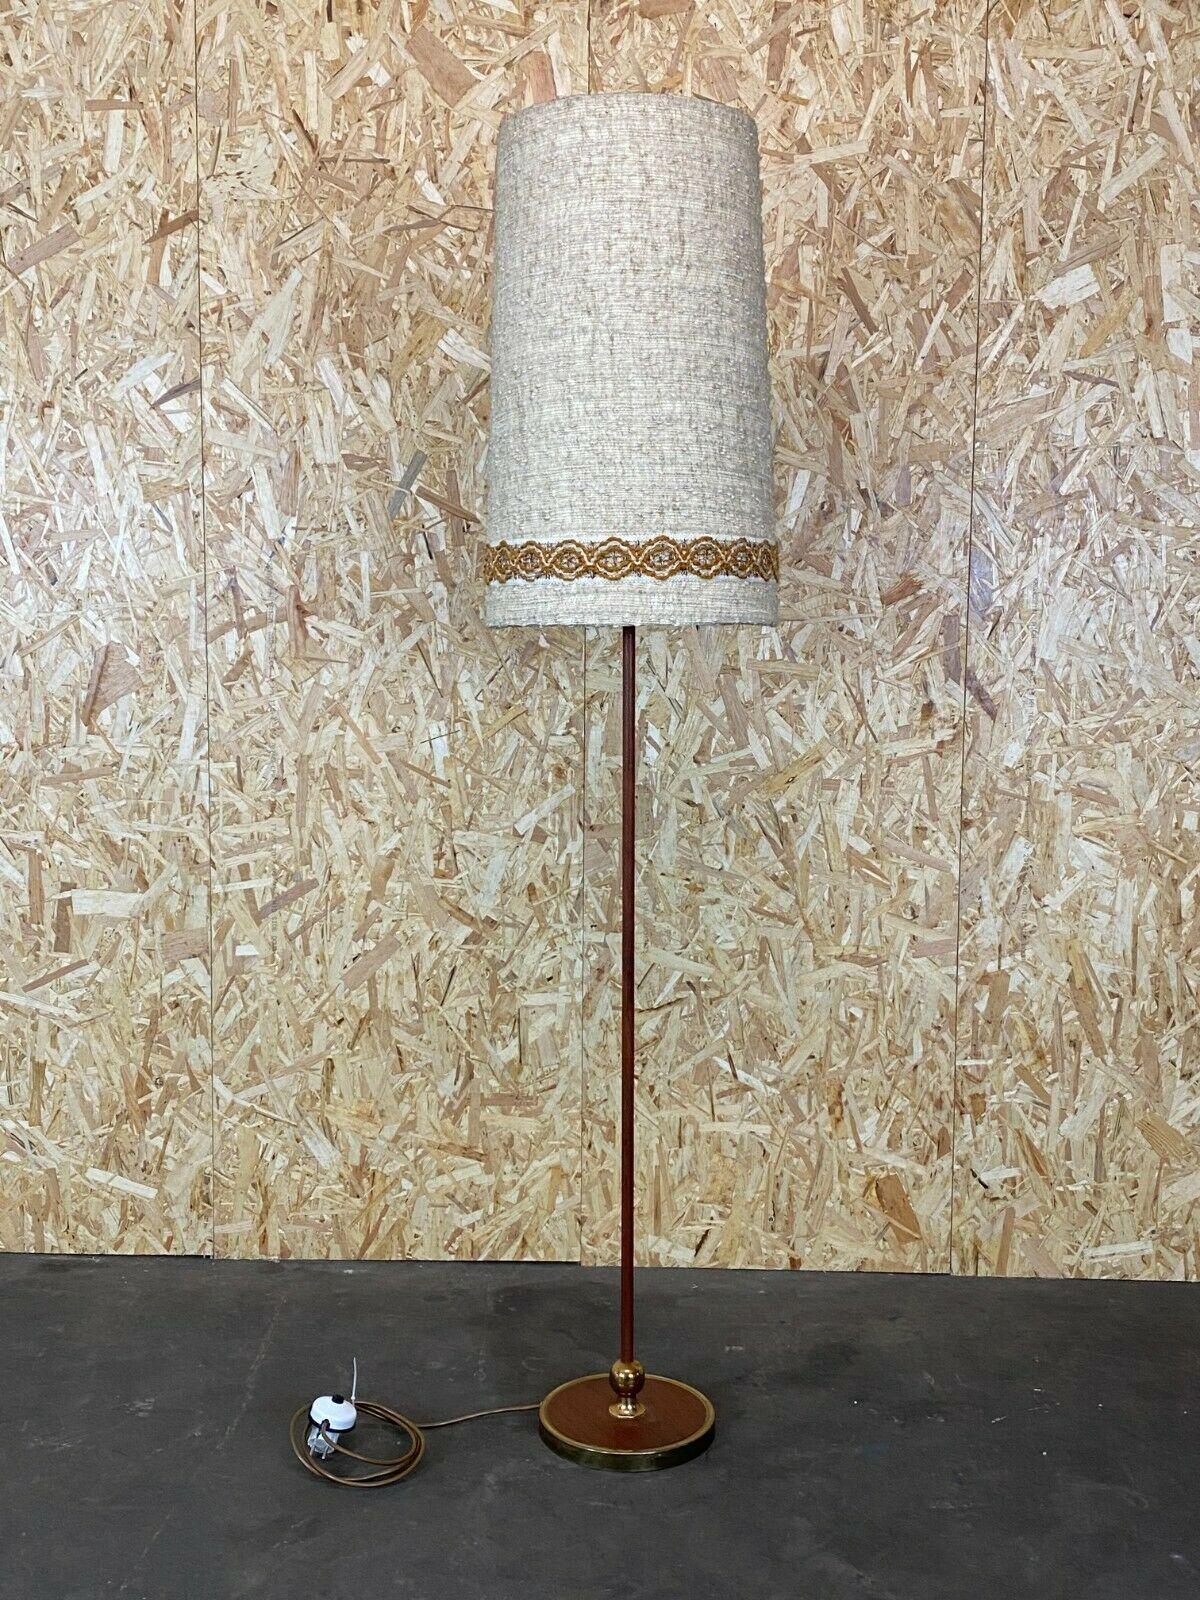 60s 70s lamp light floor lamp floor lamp teak space age design 60s 70s

Object: floor lamp

Manufacturer:

Condition: good

Age: around 1960-1970

Dimensions:

Diameter = 40cm
Height = 172cm

Other notes:

The pictures serve as part